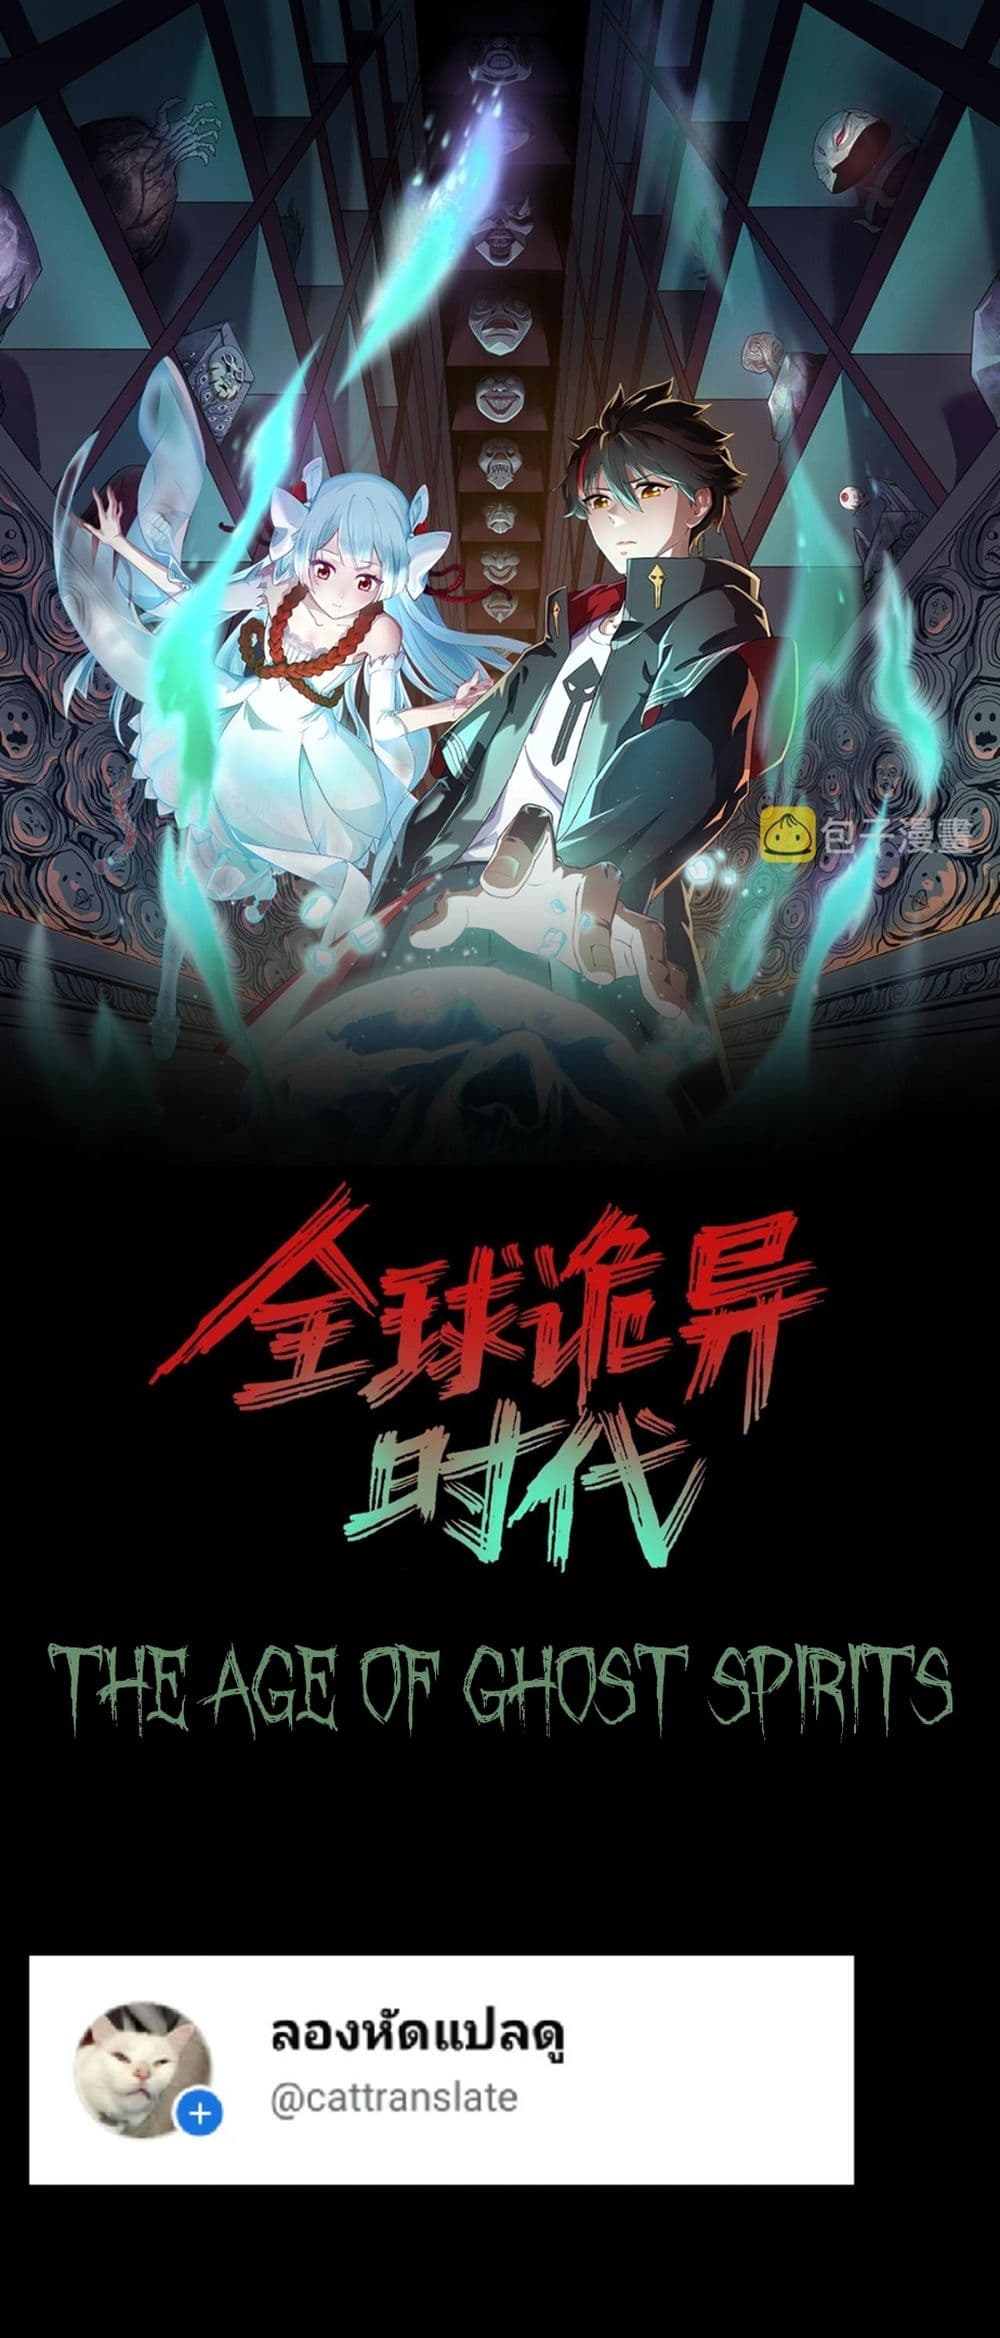 The Age of Ghost Spirits à¸à¸­à¸à¸à¸µà¹ 47 (1)